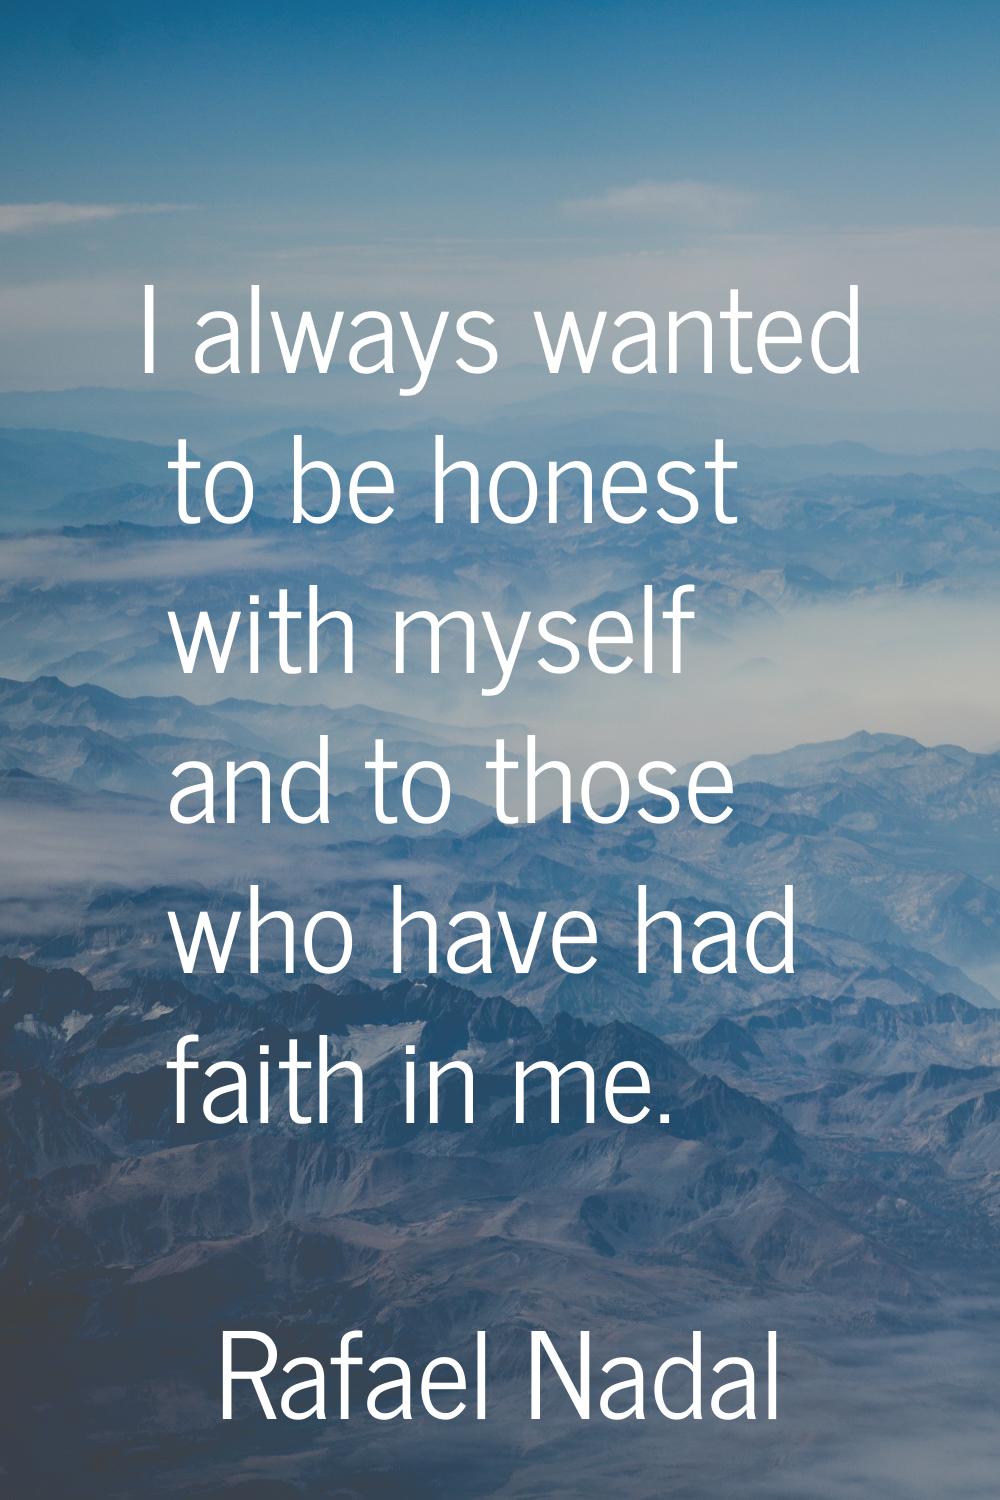 I always wanted to be honest with myself and to those who have had faith in me.